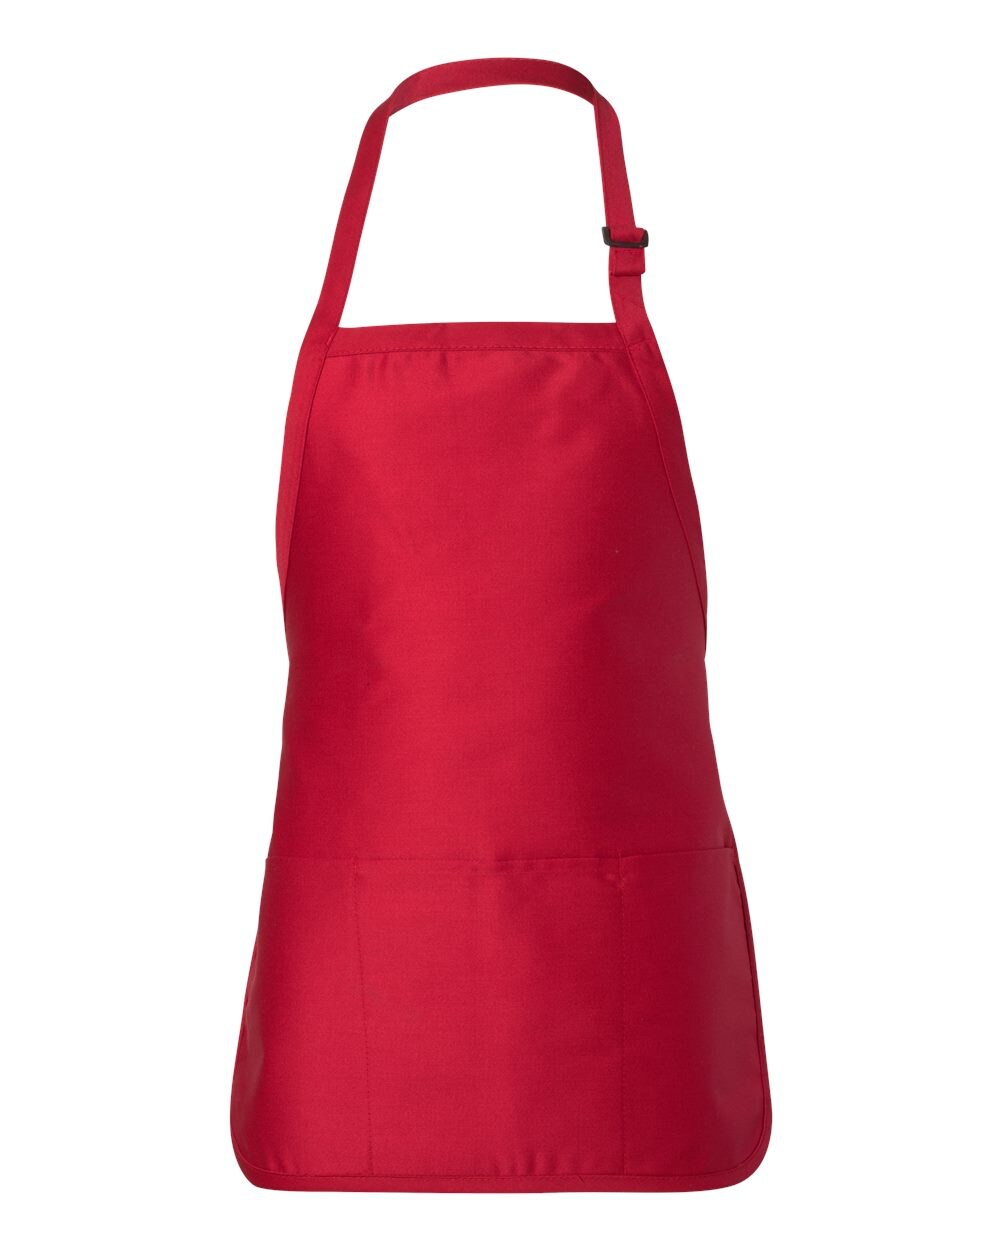 Wrapables Ruffles and Roses Canvas Apron